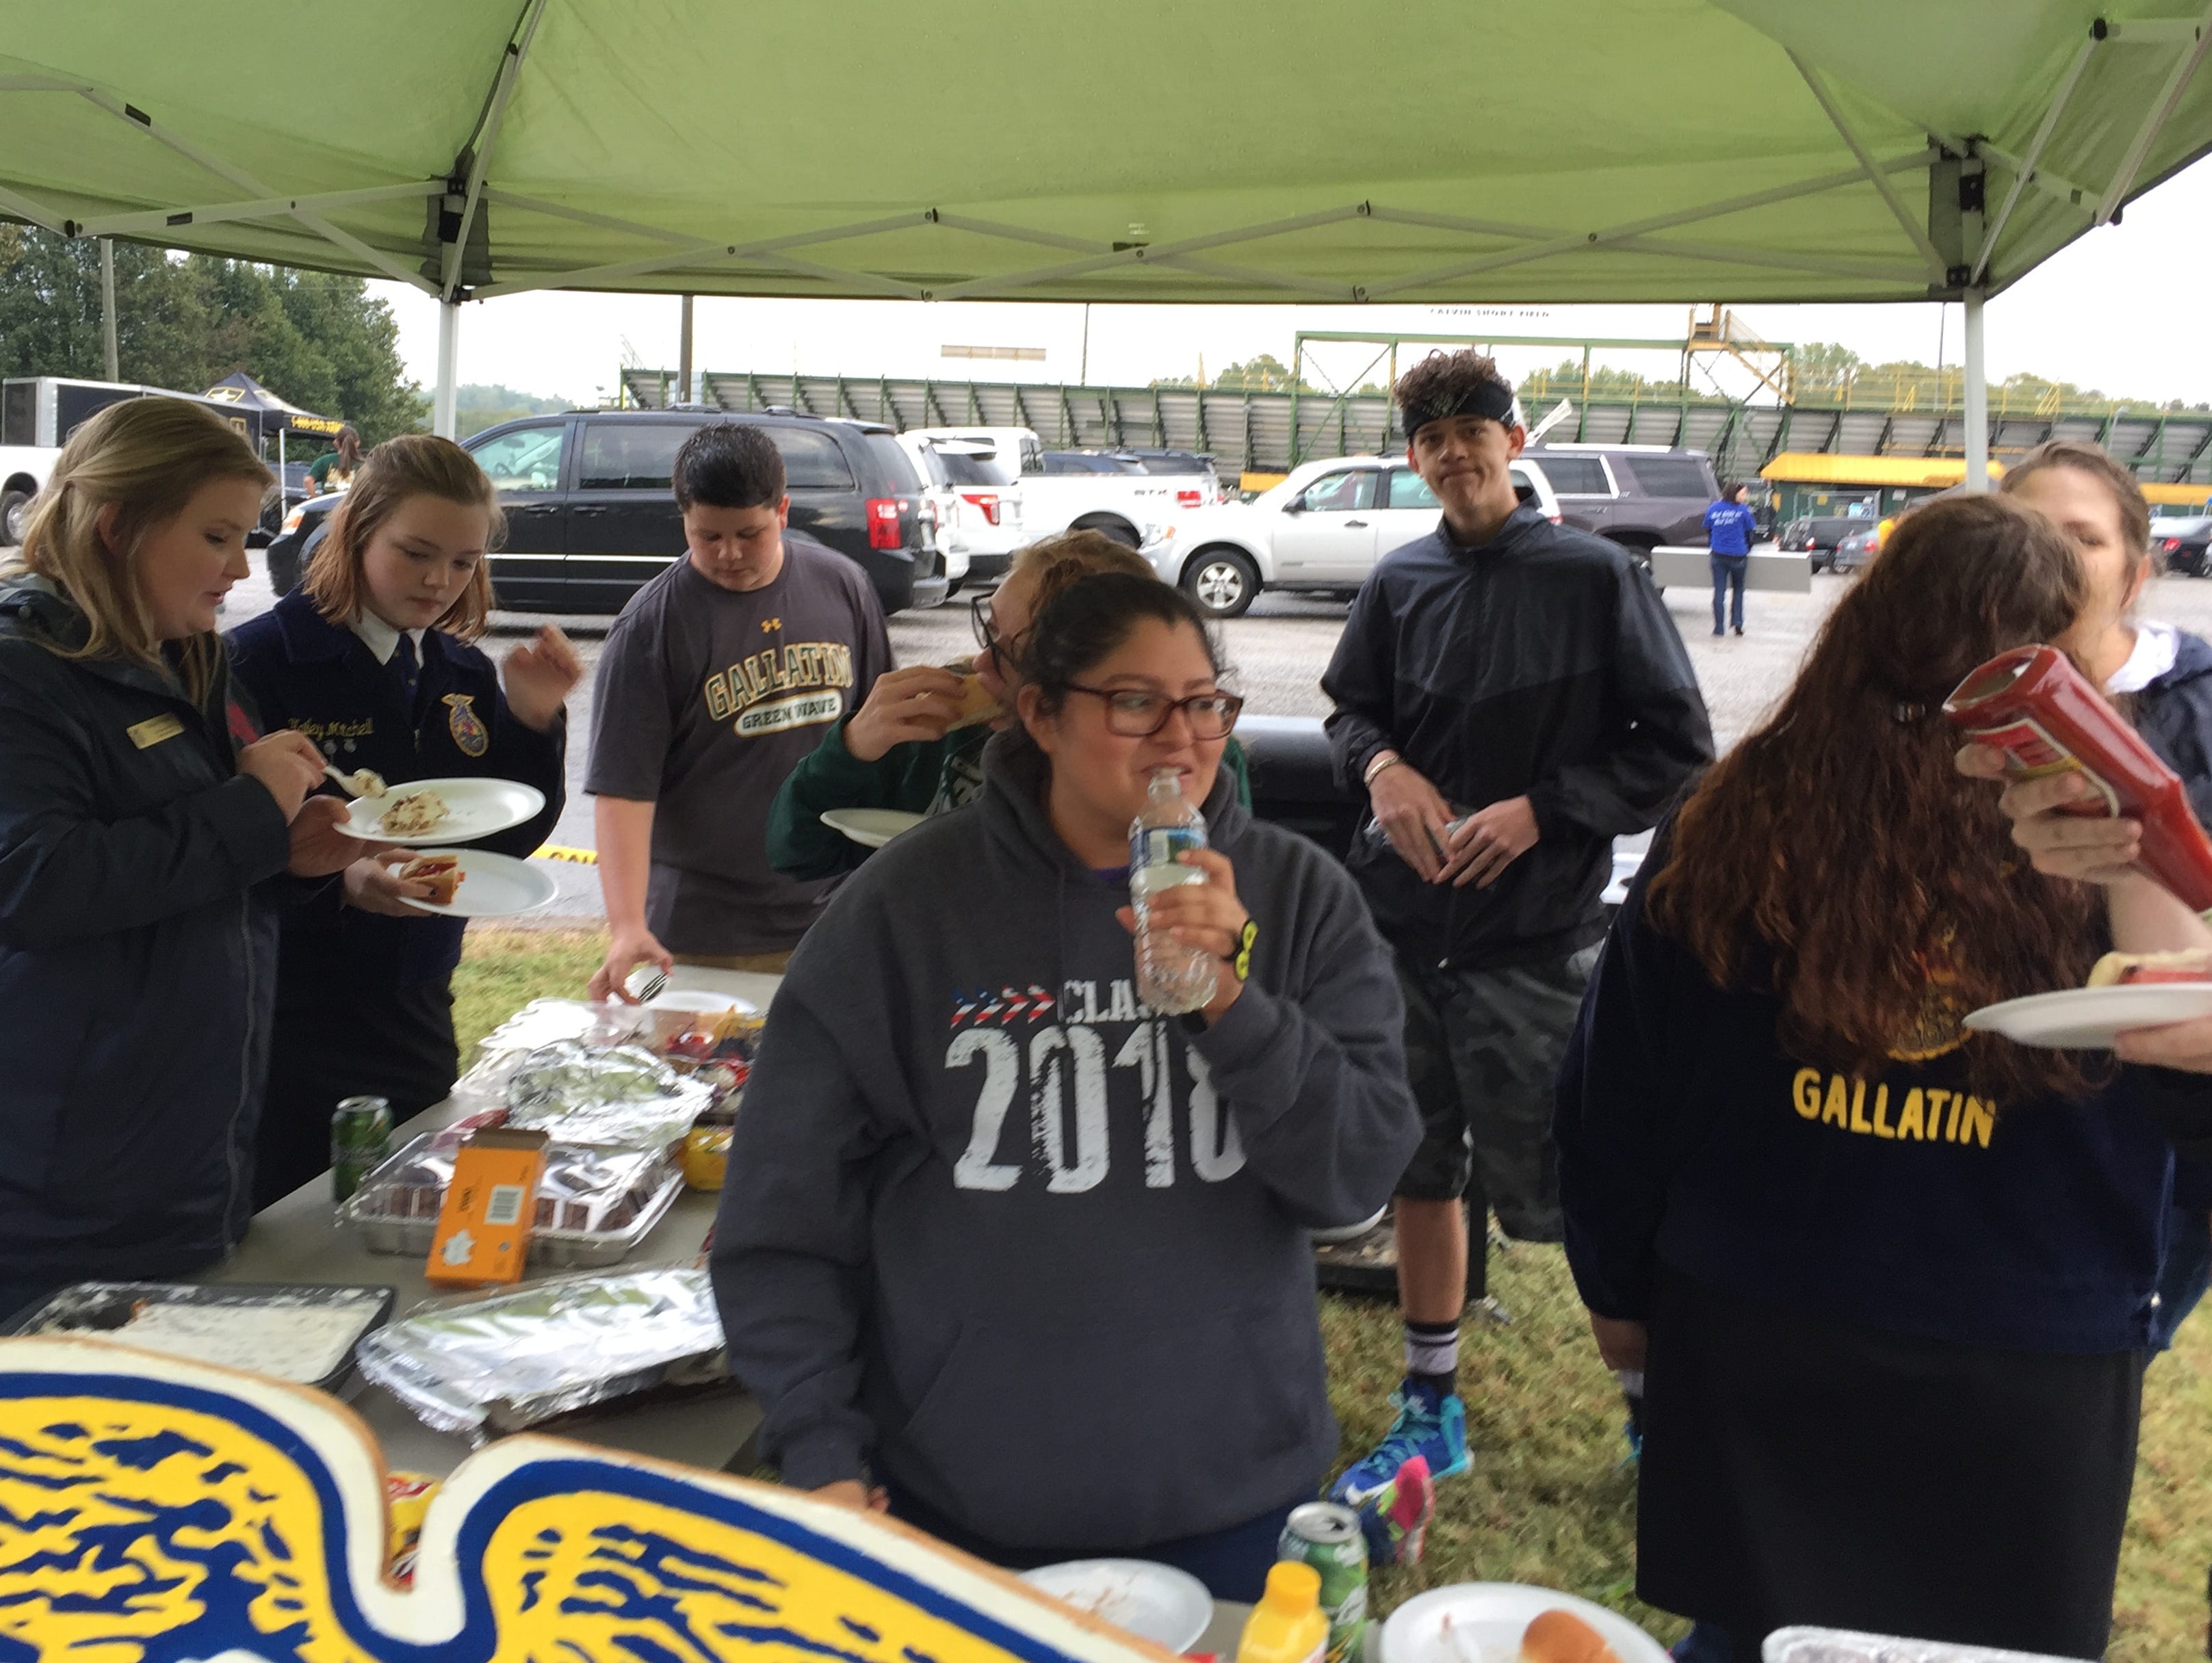 Members of the Gallatin High School Future Farmers of America chapter enjoy tailgating activities prior to their game against Beech on Friday, September 30, 2016.